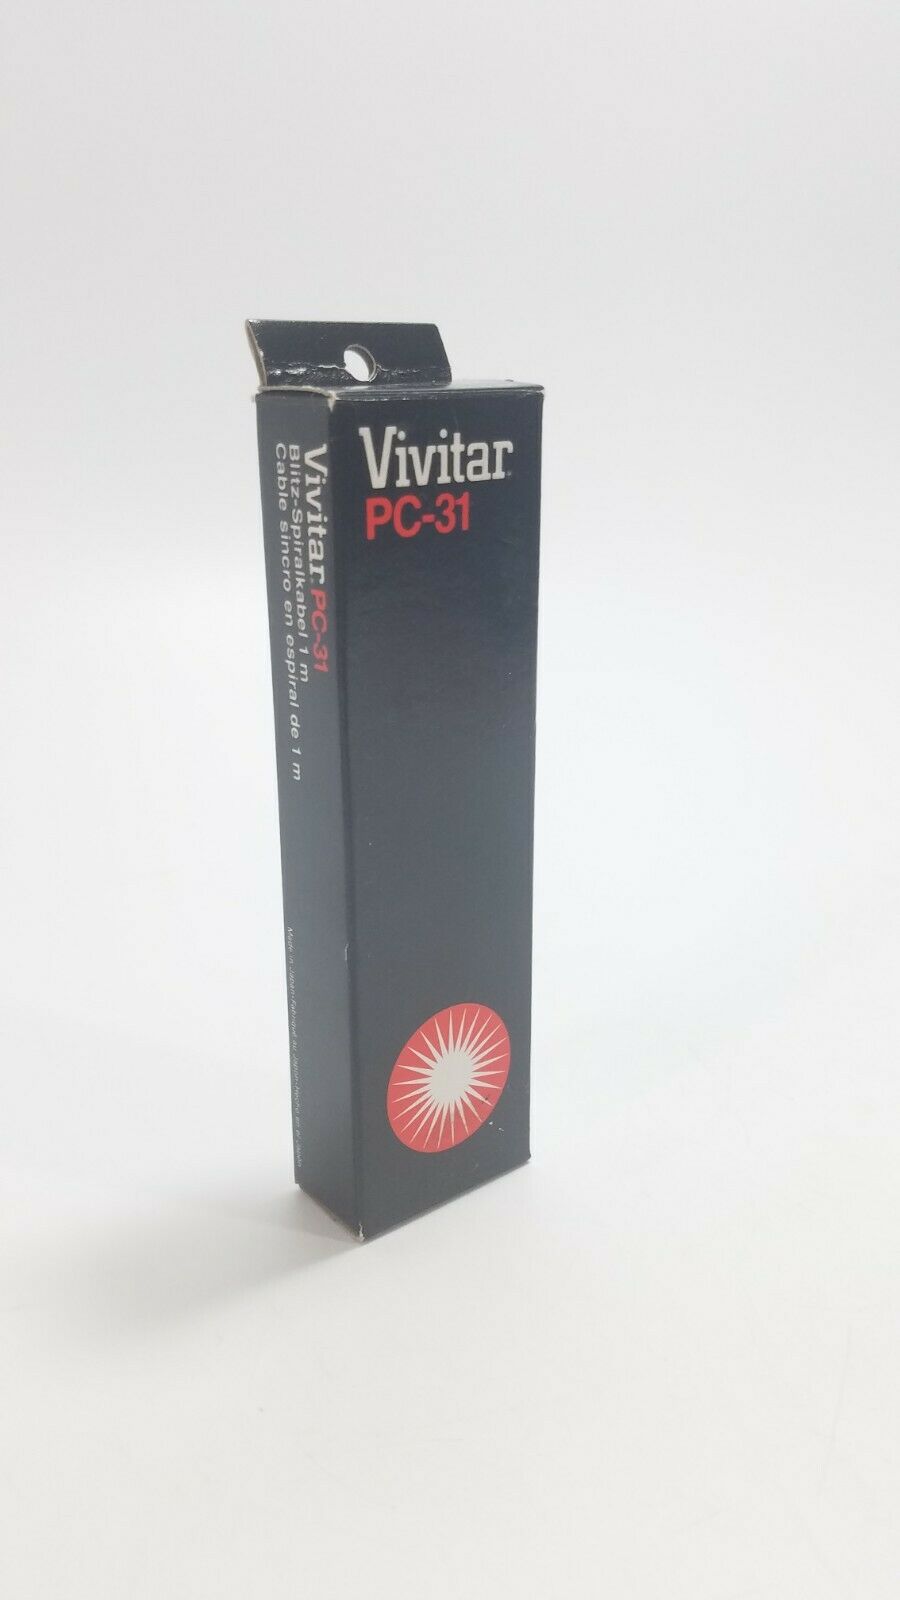 Vivitar Pc-31 Coiled Flash Sync Shutter Cord 1 Meter W/ Box Made In Japan New